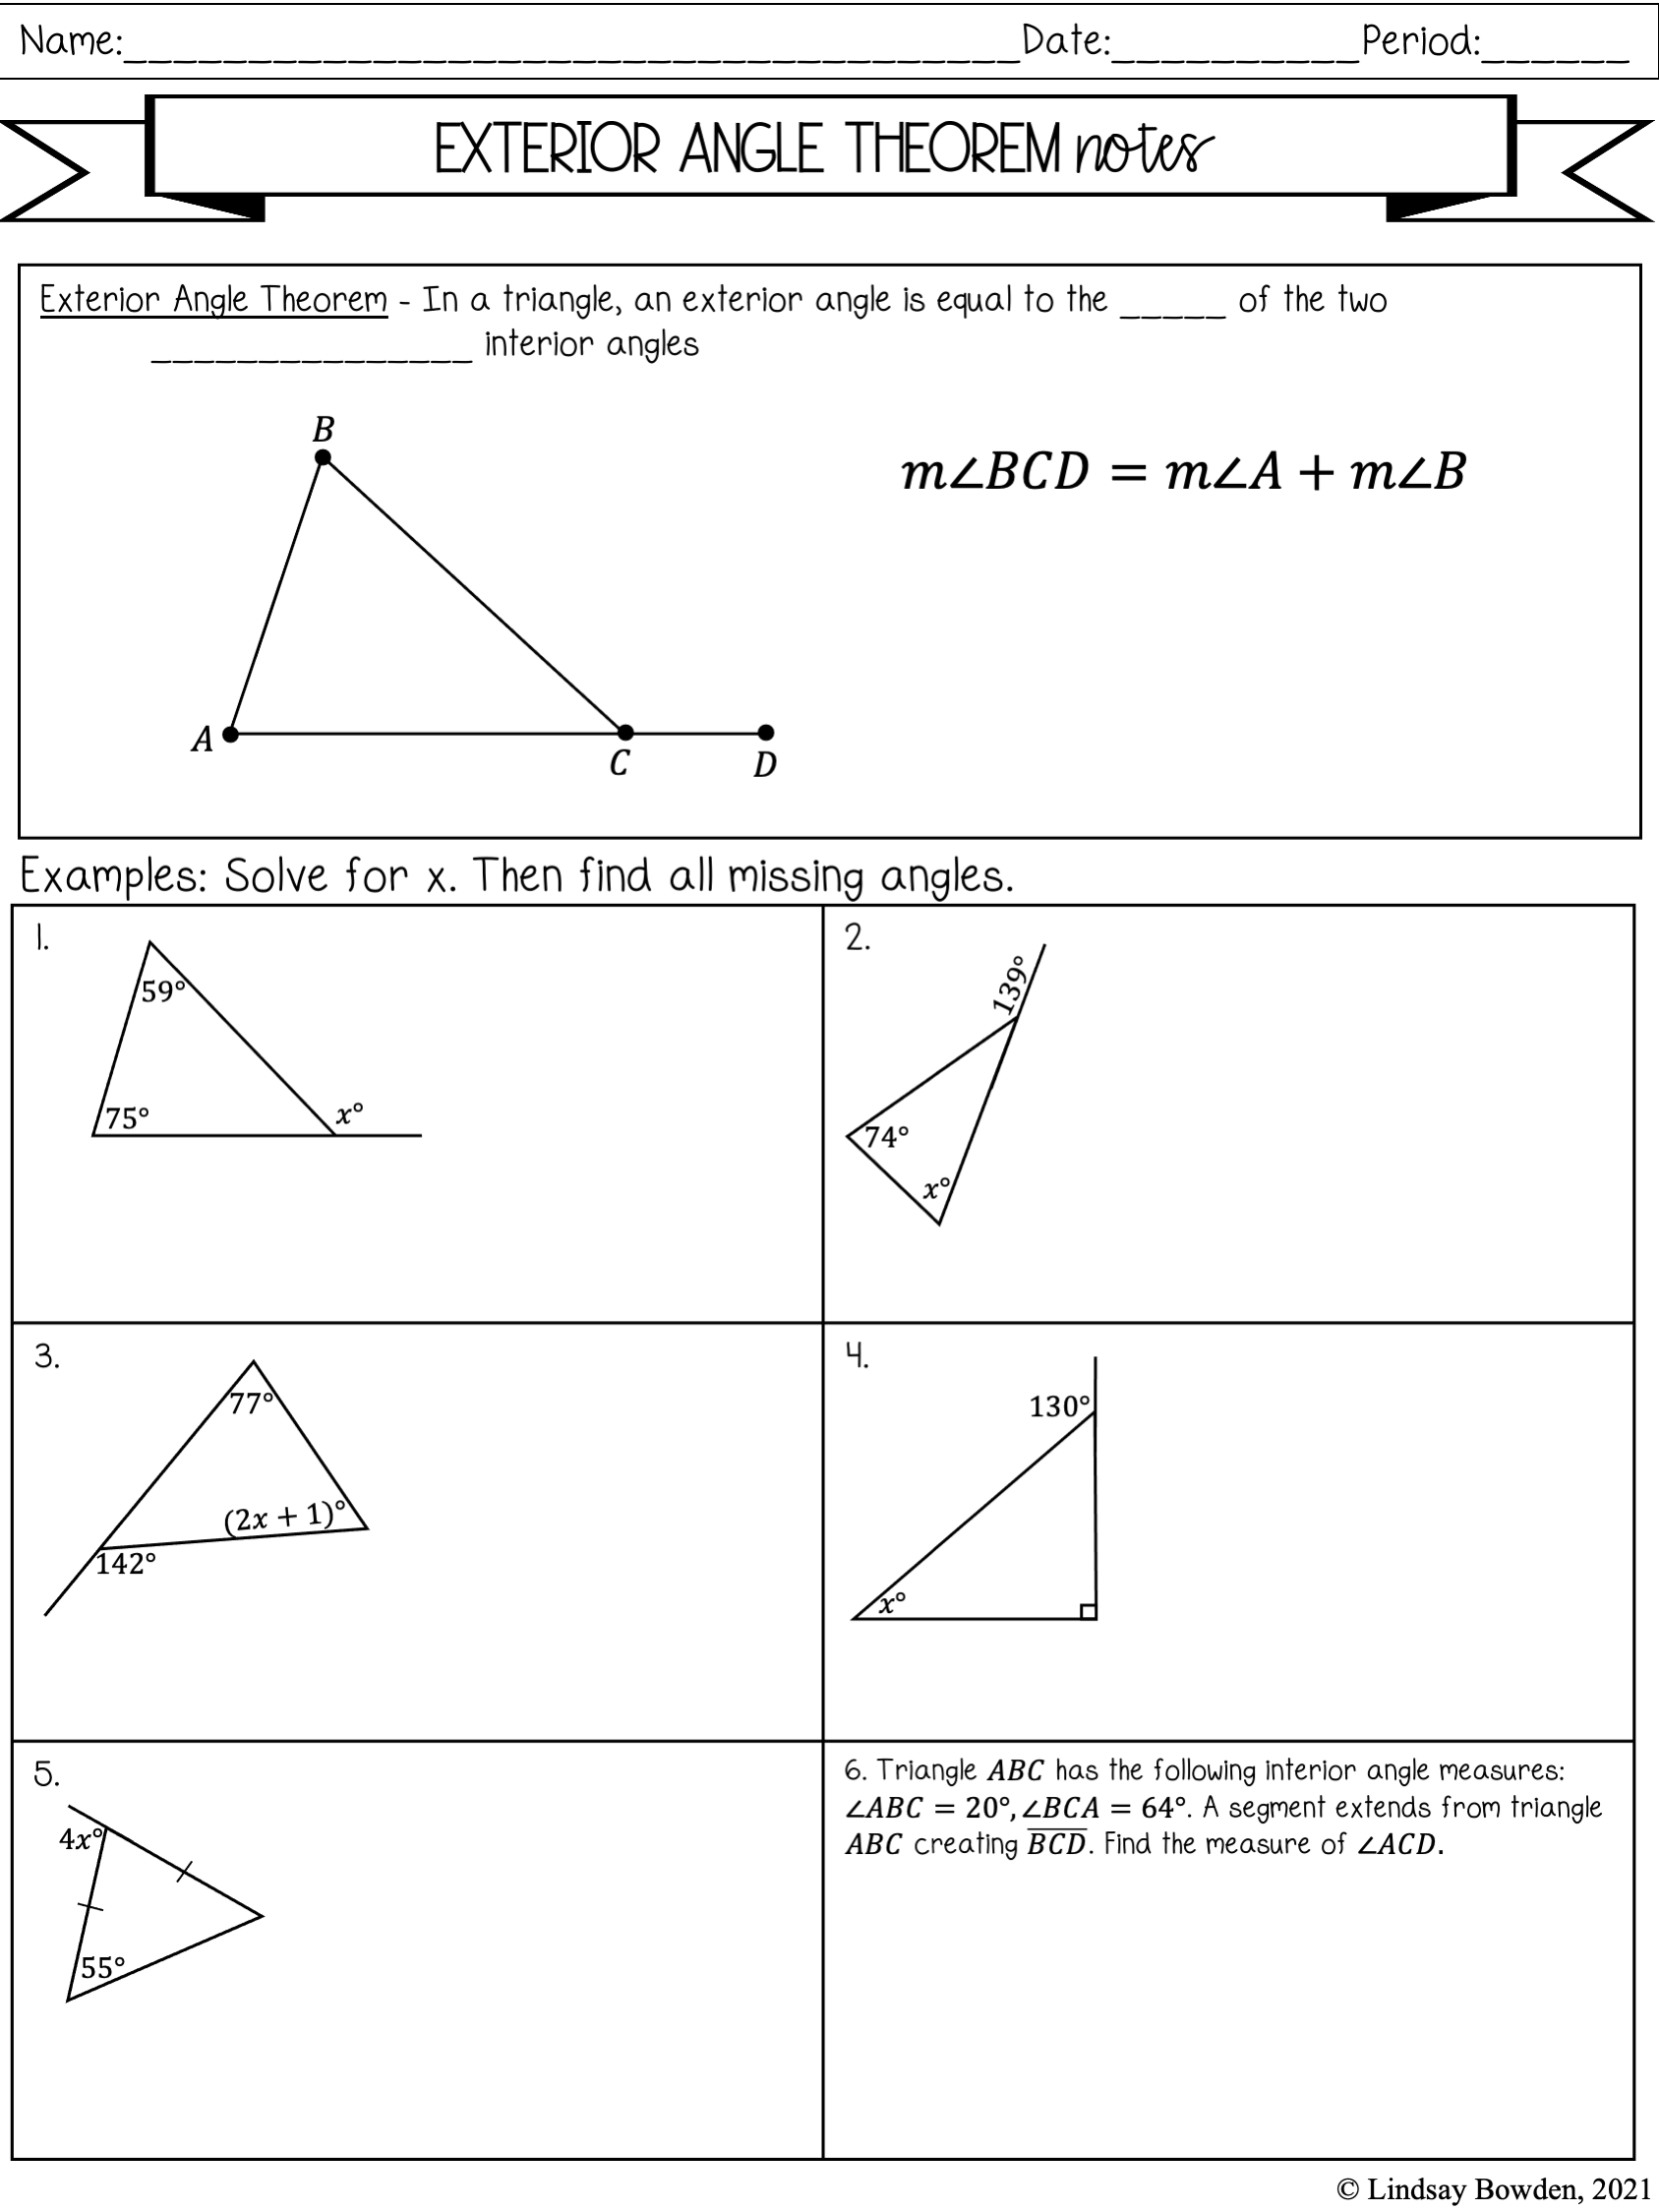 Exterior Angle Theorem Notes & Worksheets - Lindsay Bowden Regarding Exterior Angle Theorem Worksheet